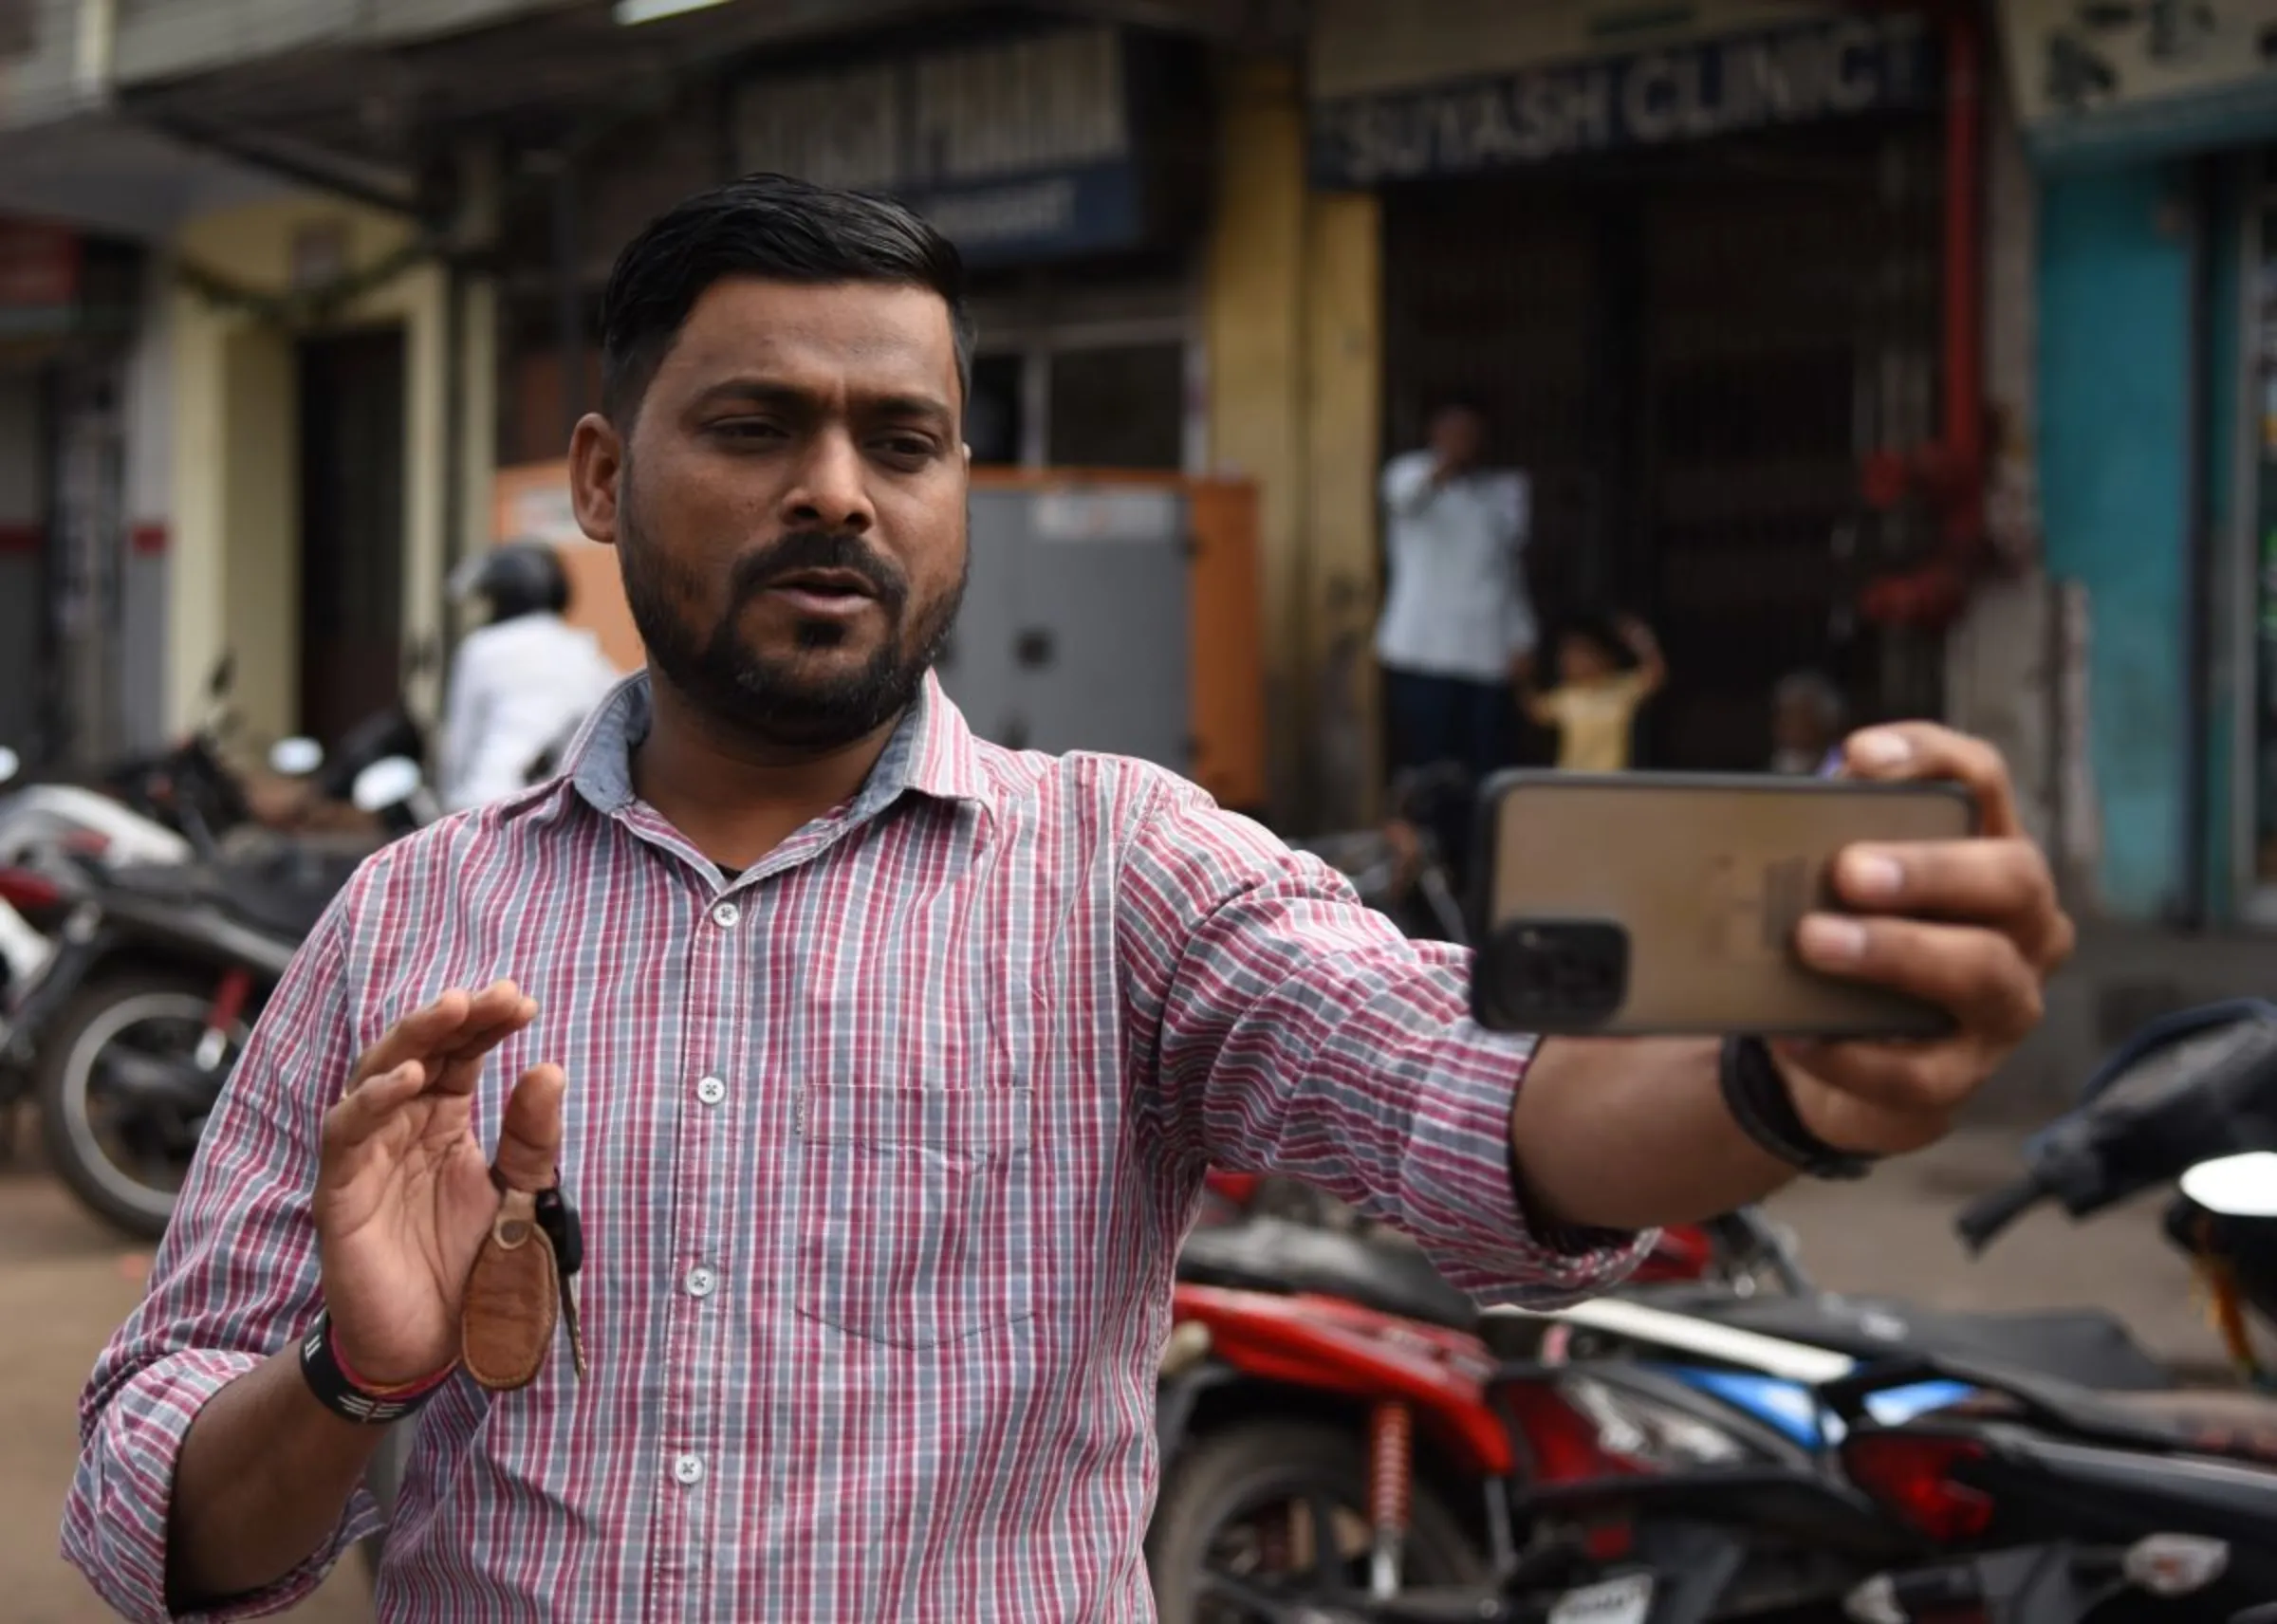 Lalji Kurmi records a video for his YouTube channel in Dhanbad, India, on November 11, 2022. Thomson Reuters Foundation/Tanmoy Bhaduri